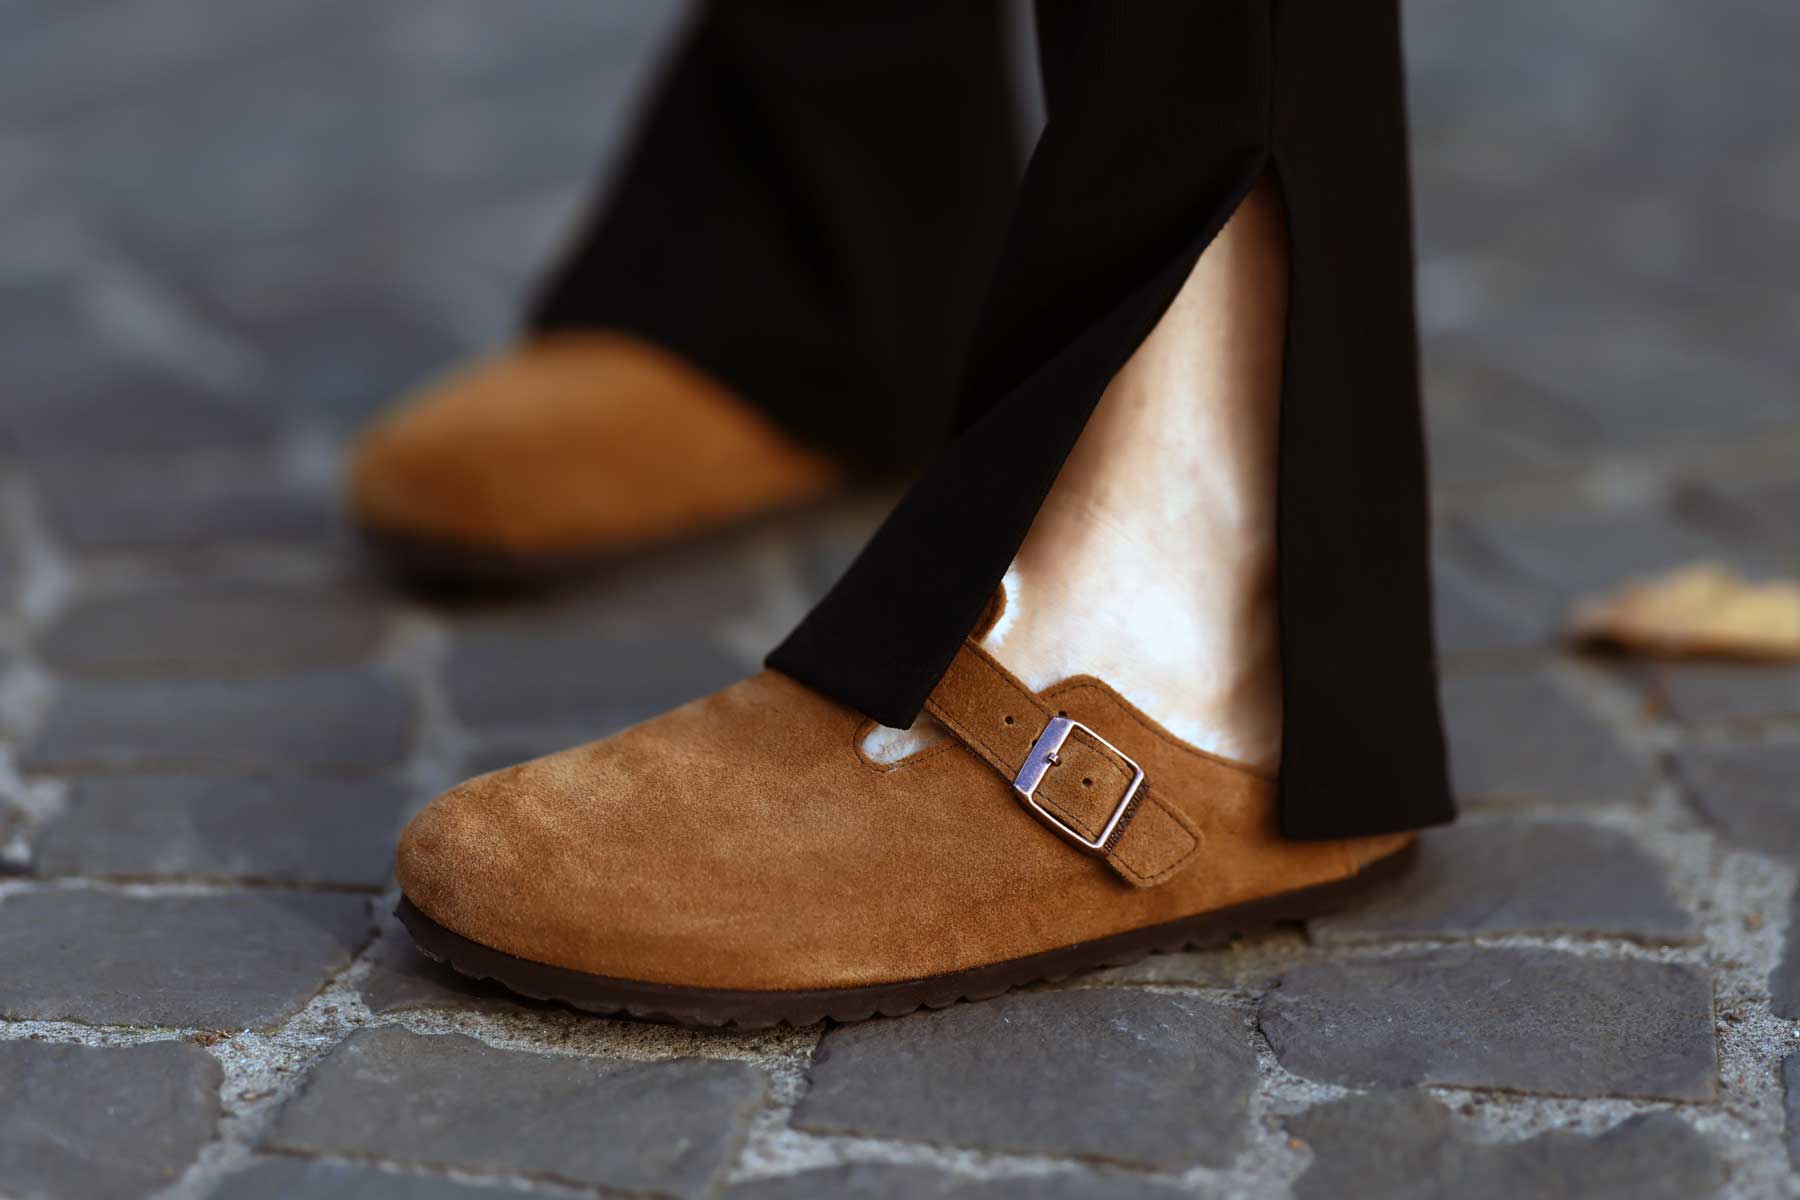 Why Birkenstock's Boston Mules Are Selling Out—and Alternatives to